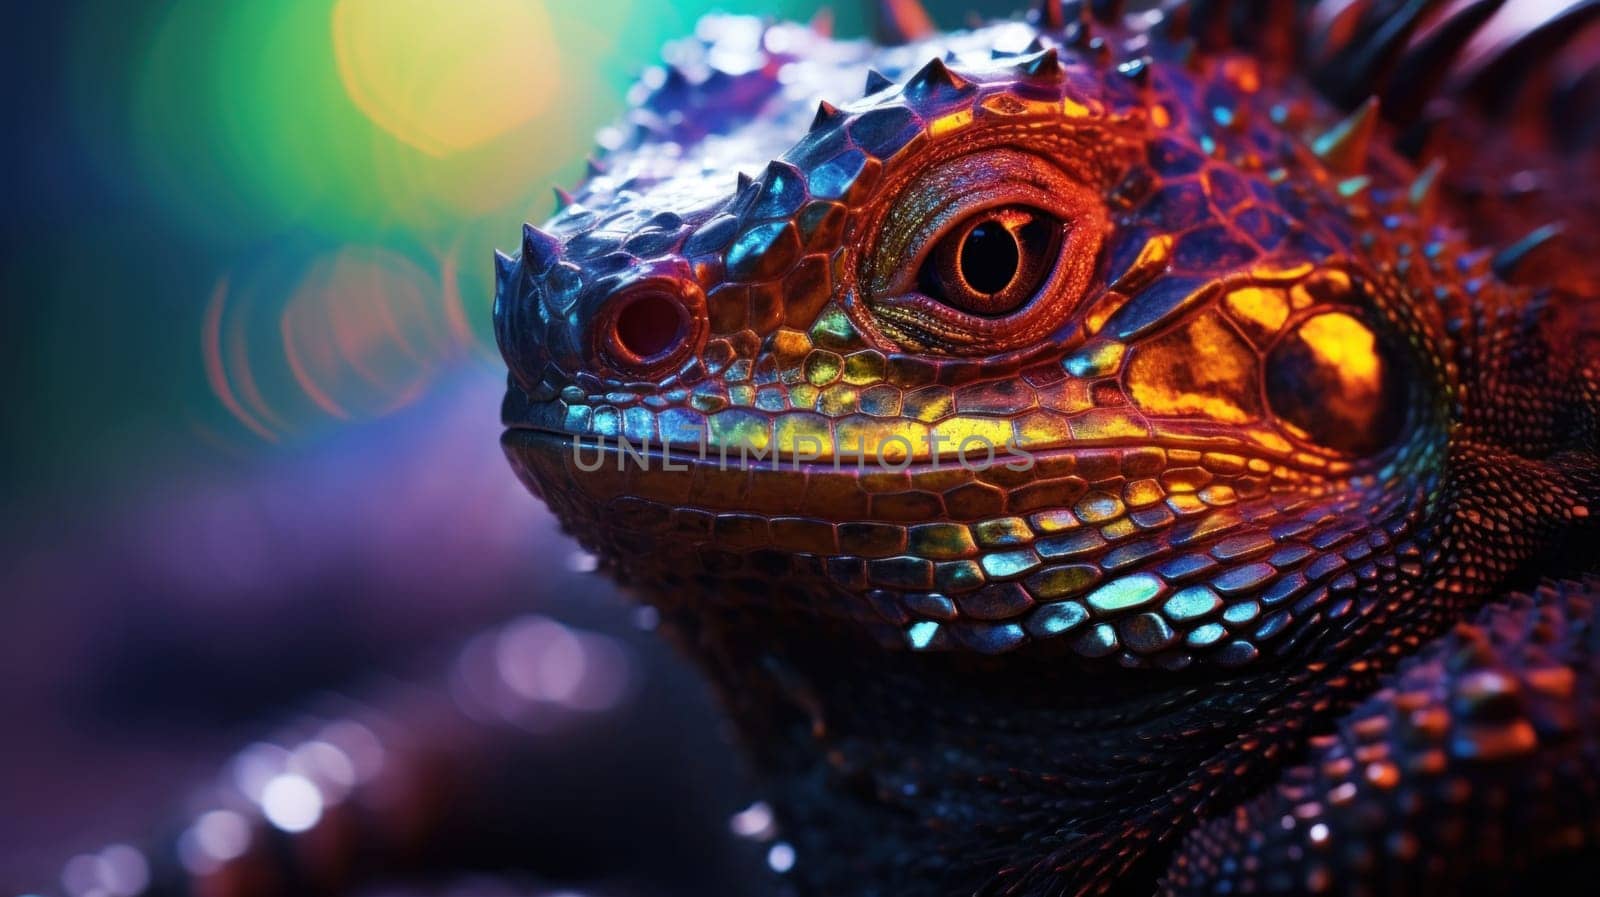 A close up of a colorful lizard with spikes on its head, AI by starush